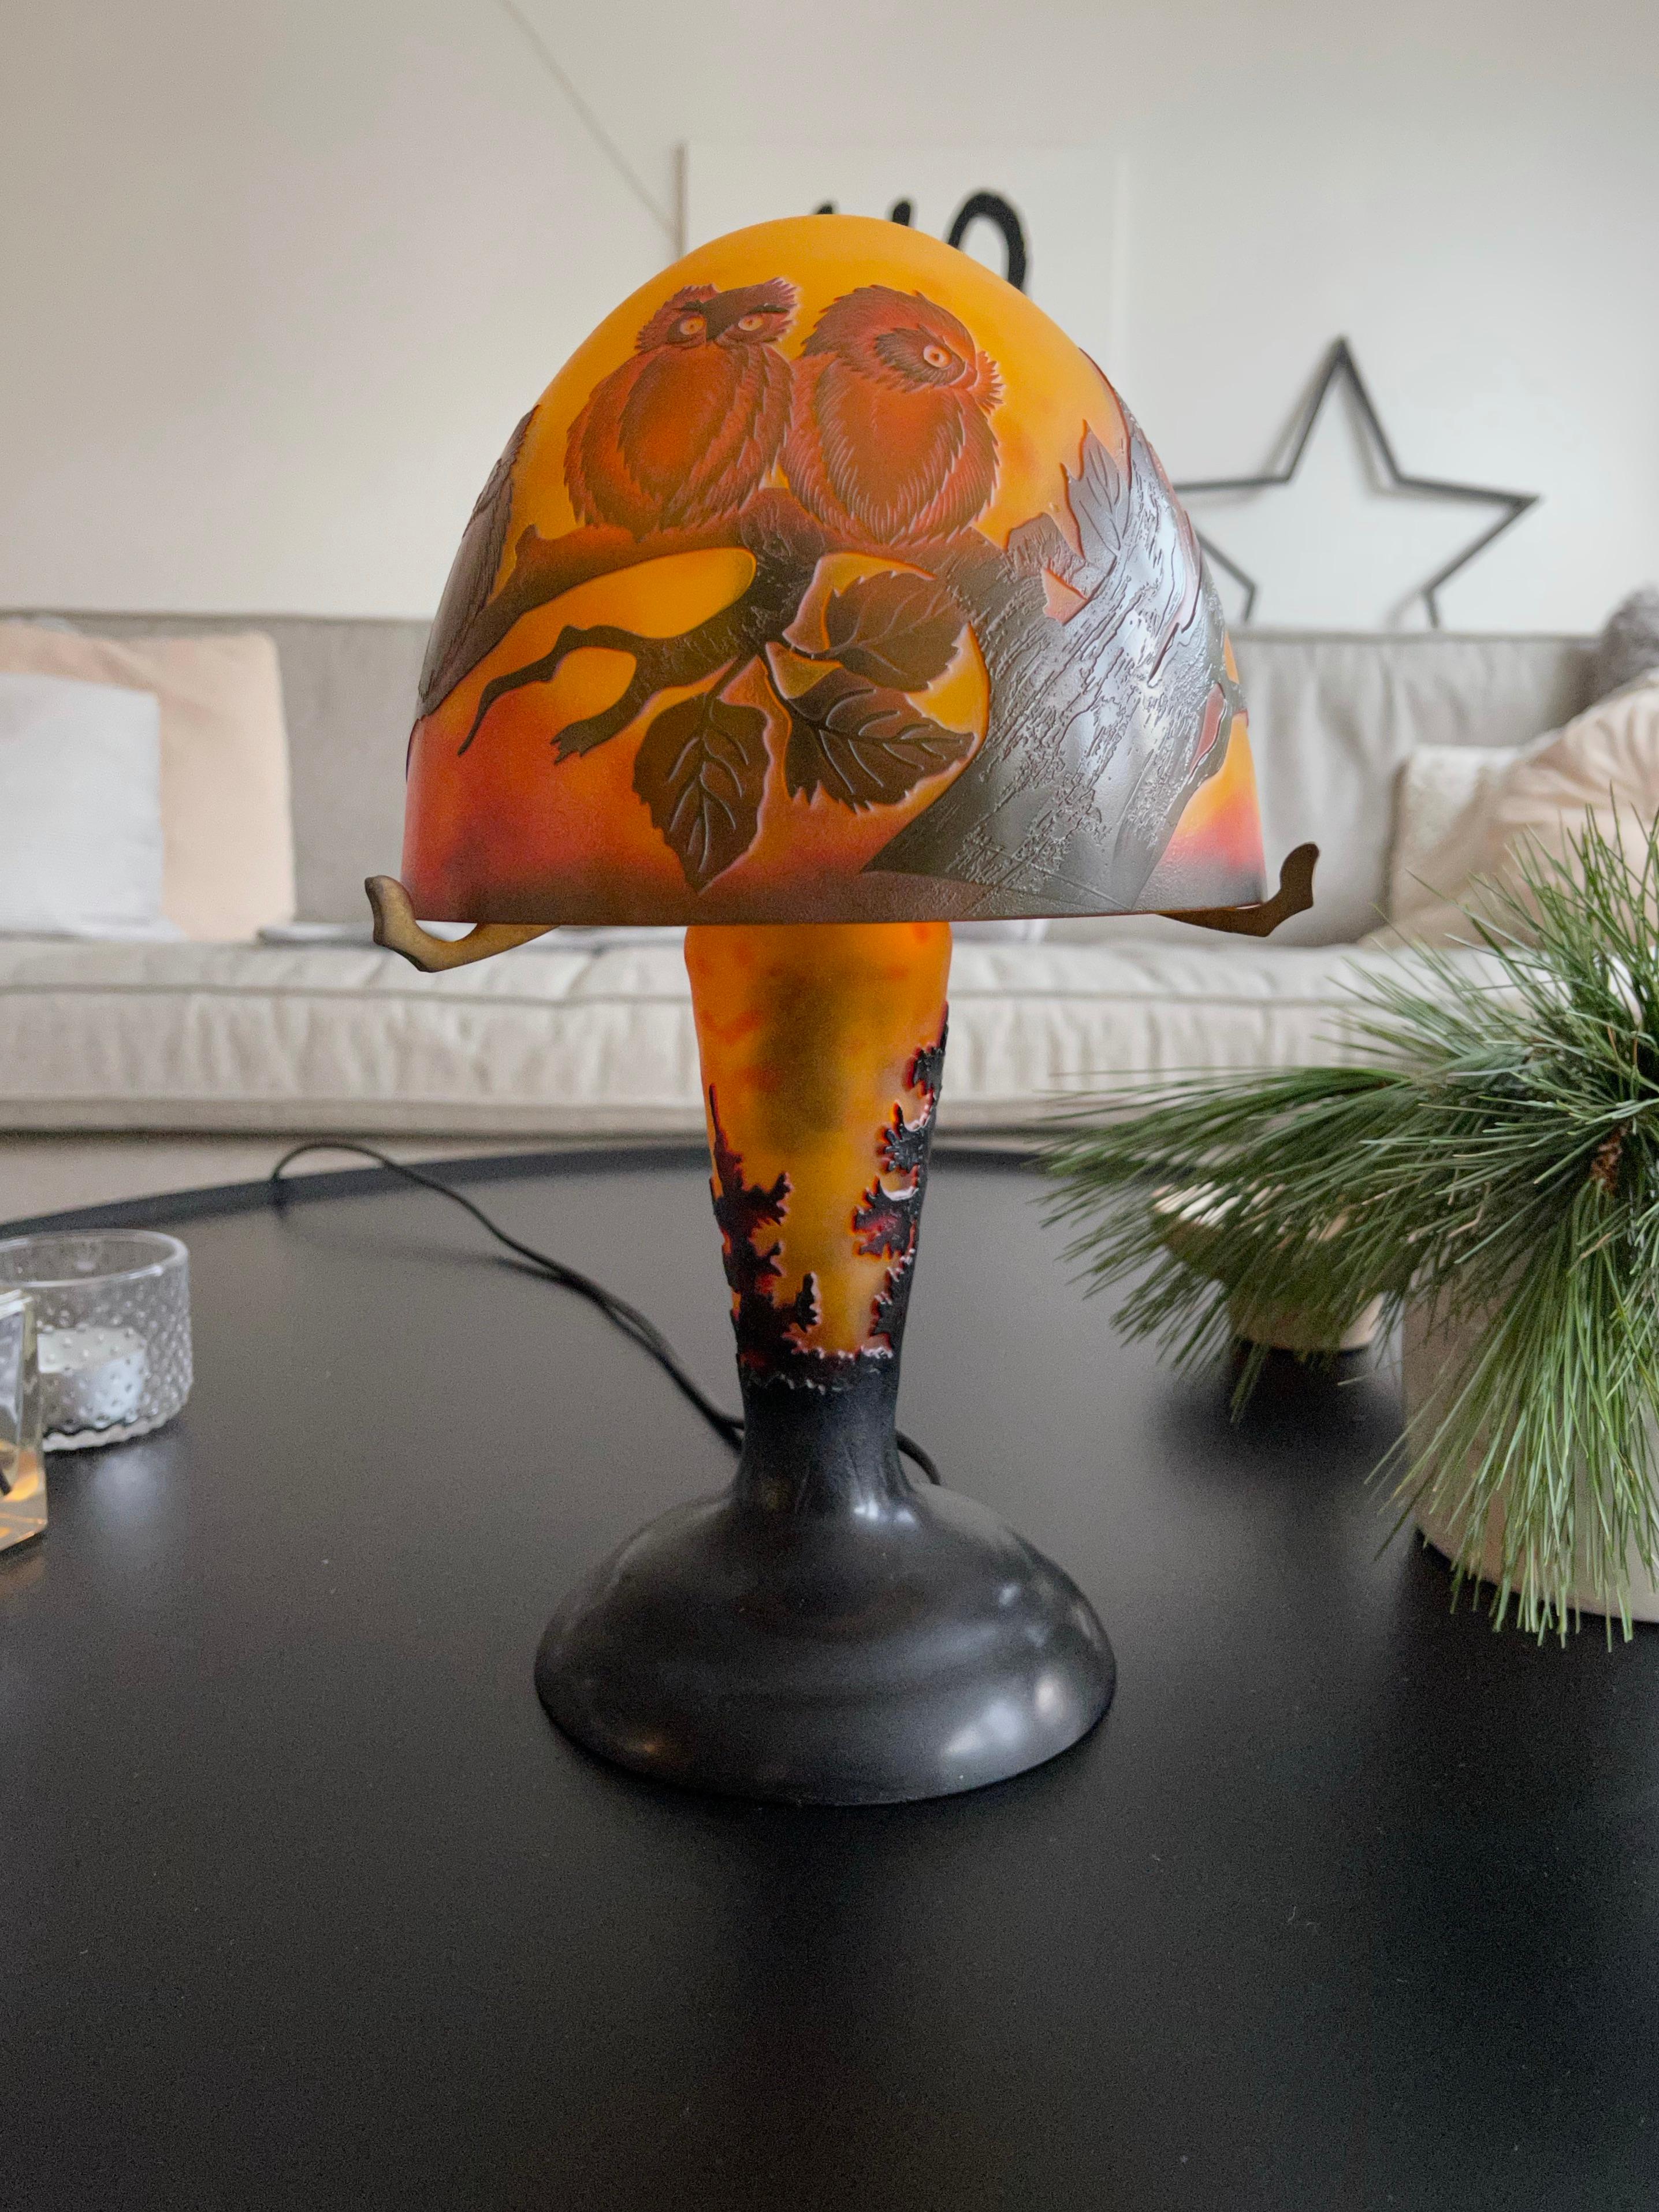 Lovely and stylish table lamp with a small group of owls sitting in a tree.

This 1980s mushroom shape table lamp has some of the most beautiful owl figures ever. The combination of the organic shape of this table lamp and the natural decor (in